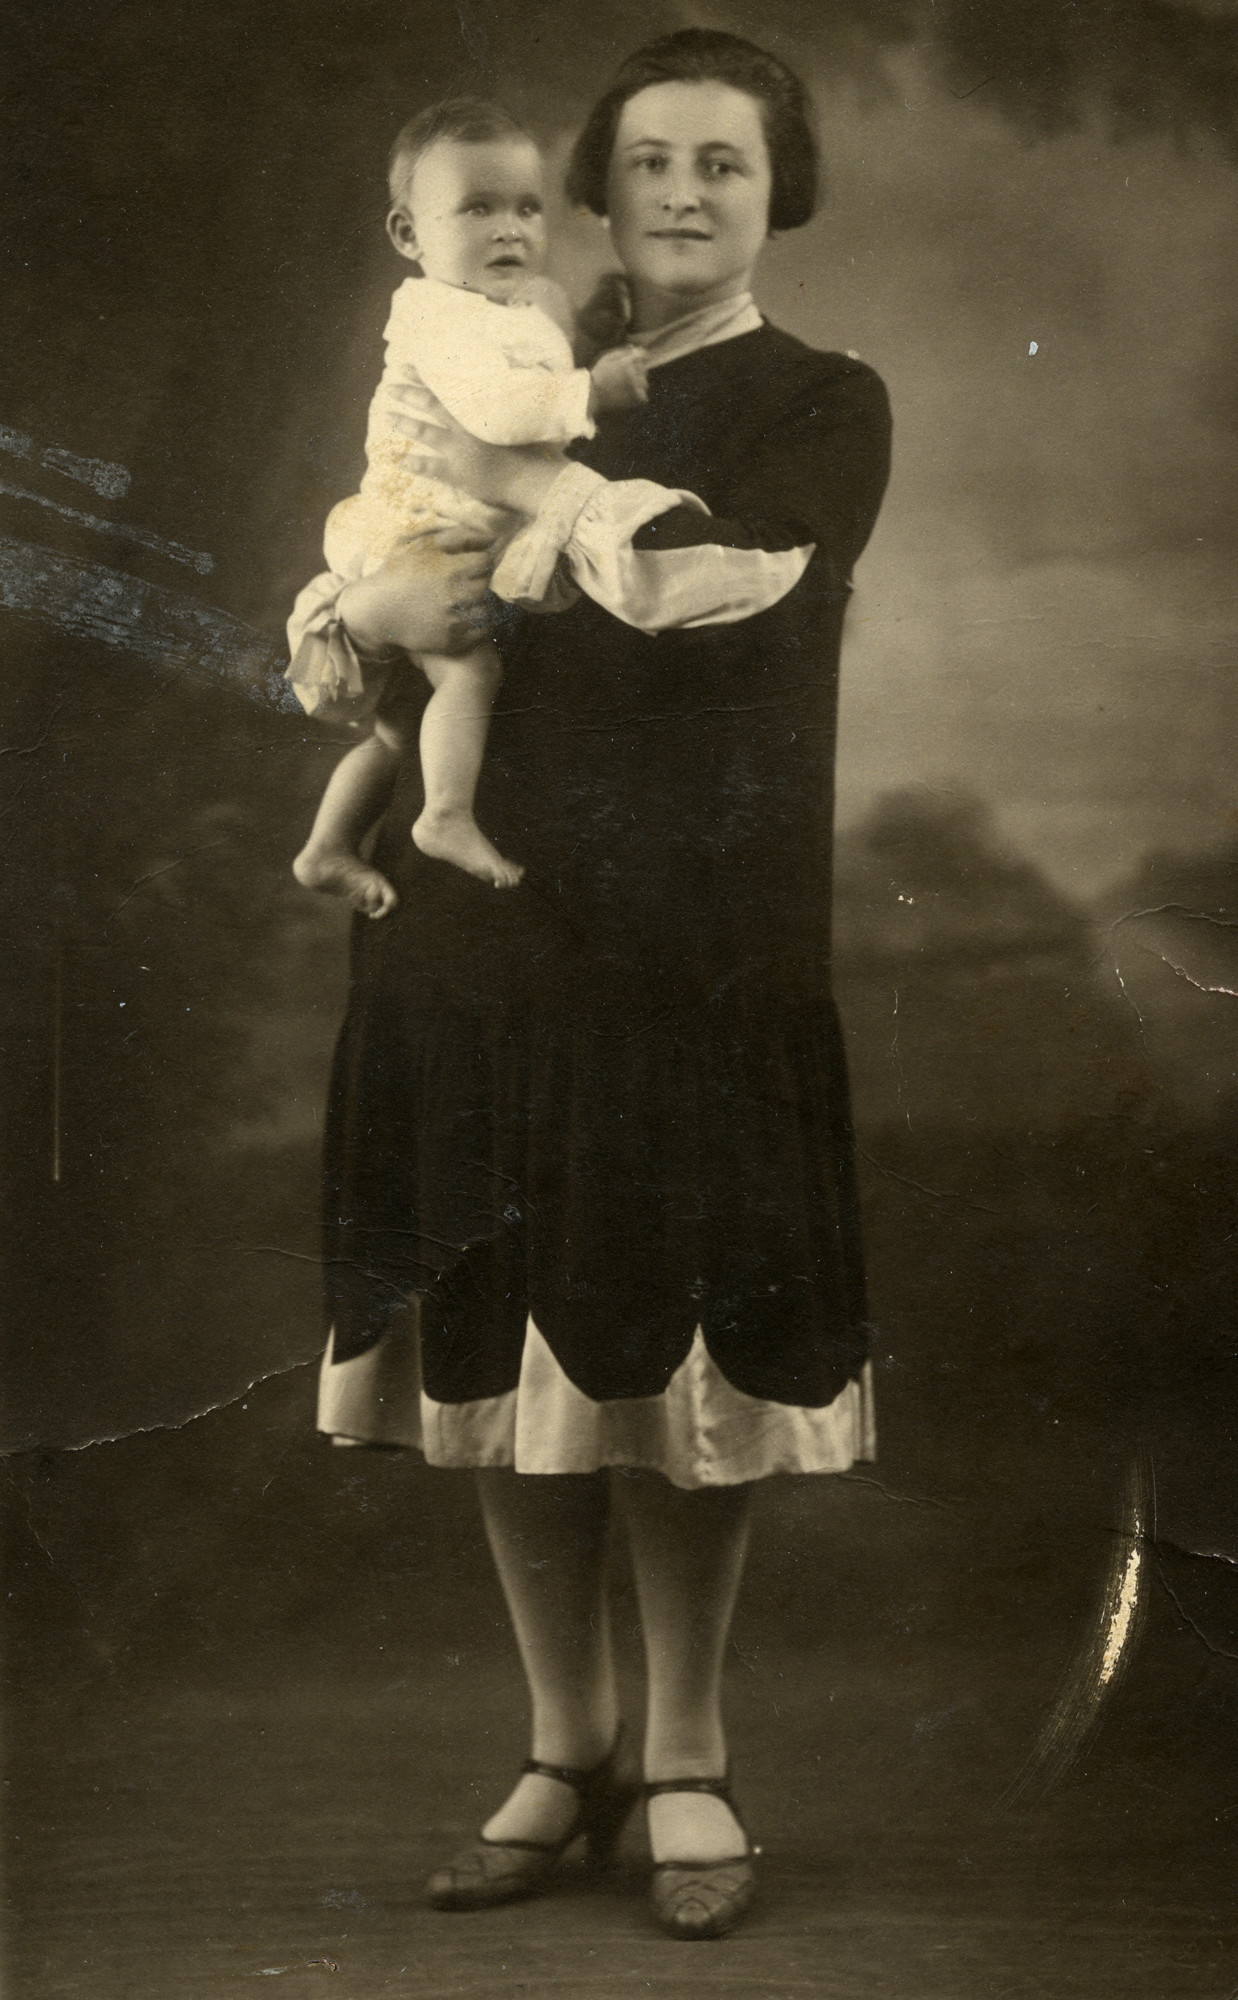 Raya Dimenstein holding her baby, Sophie.

Raya, her husband, and Sophie were deported and are presumed to have perished.